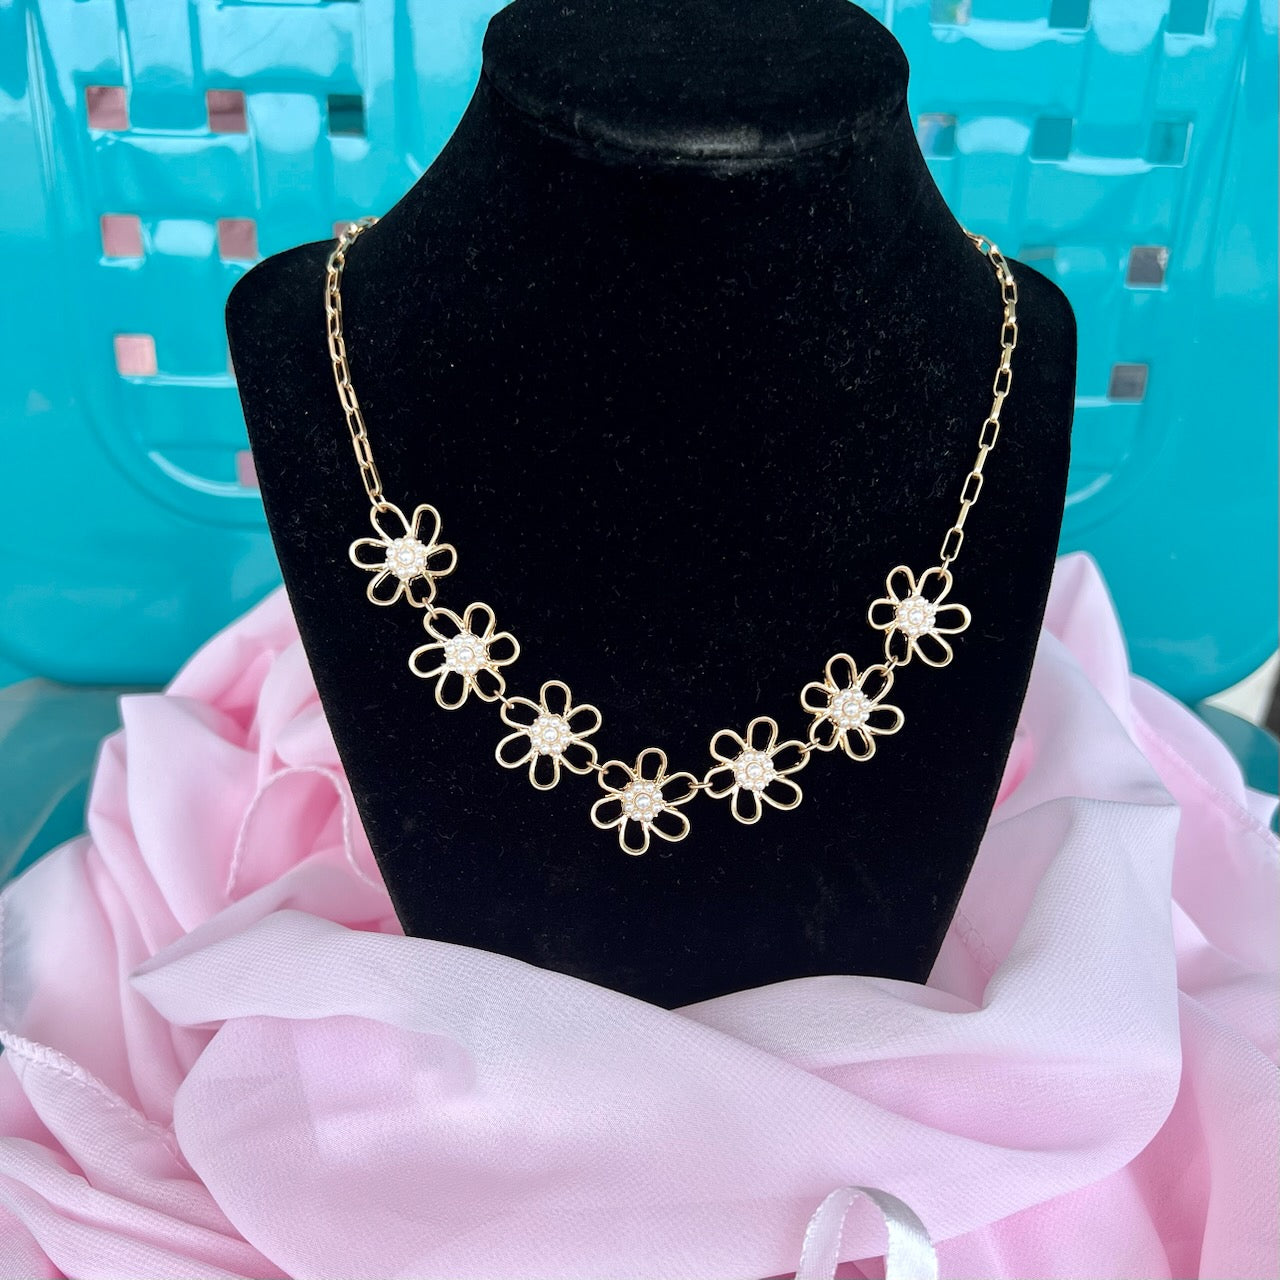 Daisy Pearl Cluster Flower Linked Chain Necklace in Worn Gold-Necklaces-Canvas Style-Market Street Nest, Fashionable Clothing, Shoes and Home Décor Located in Mabank, TX